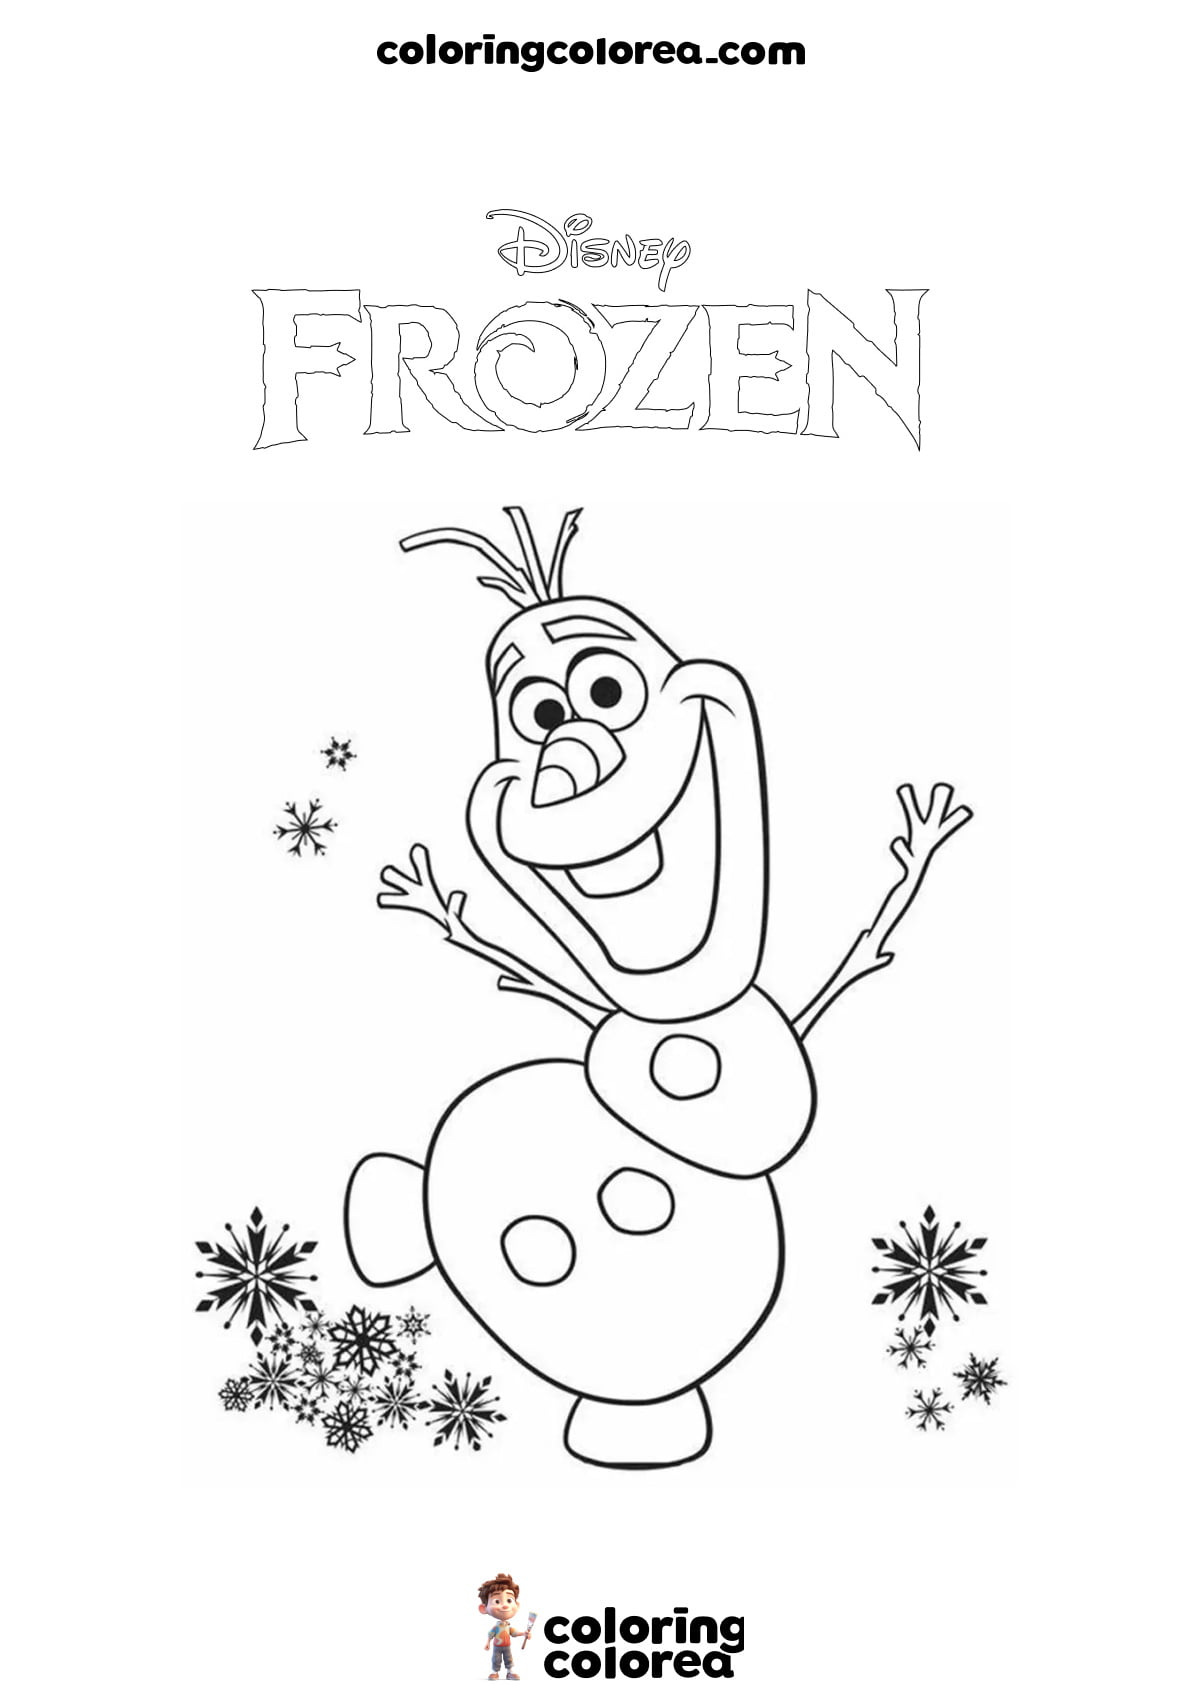 Colouring drawing of Olaf, the cute snowman from Frozen